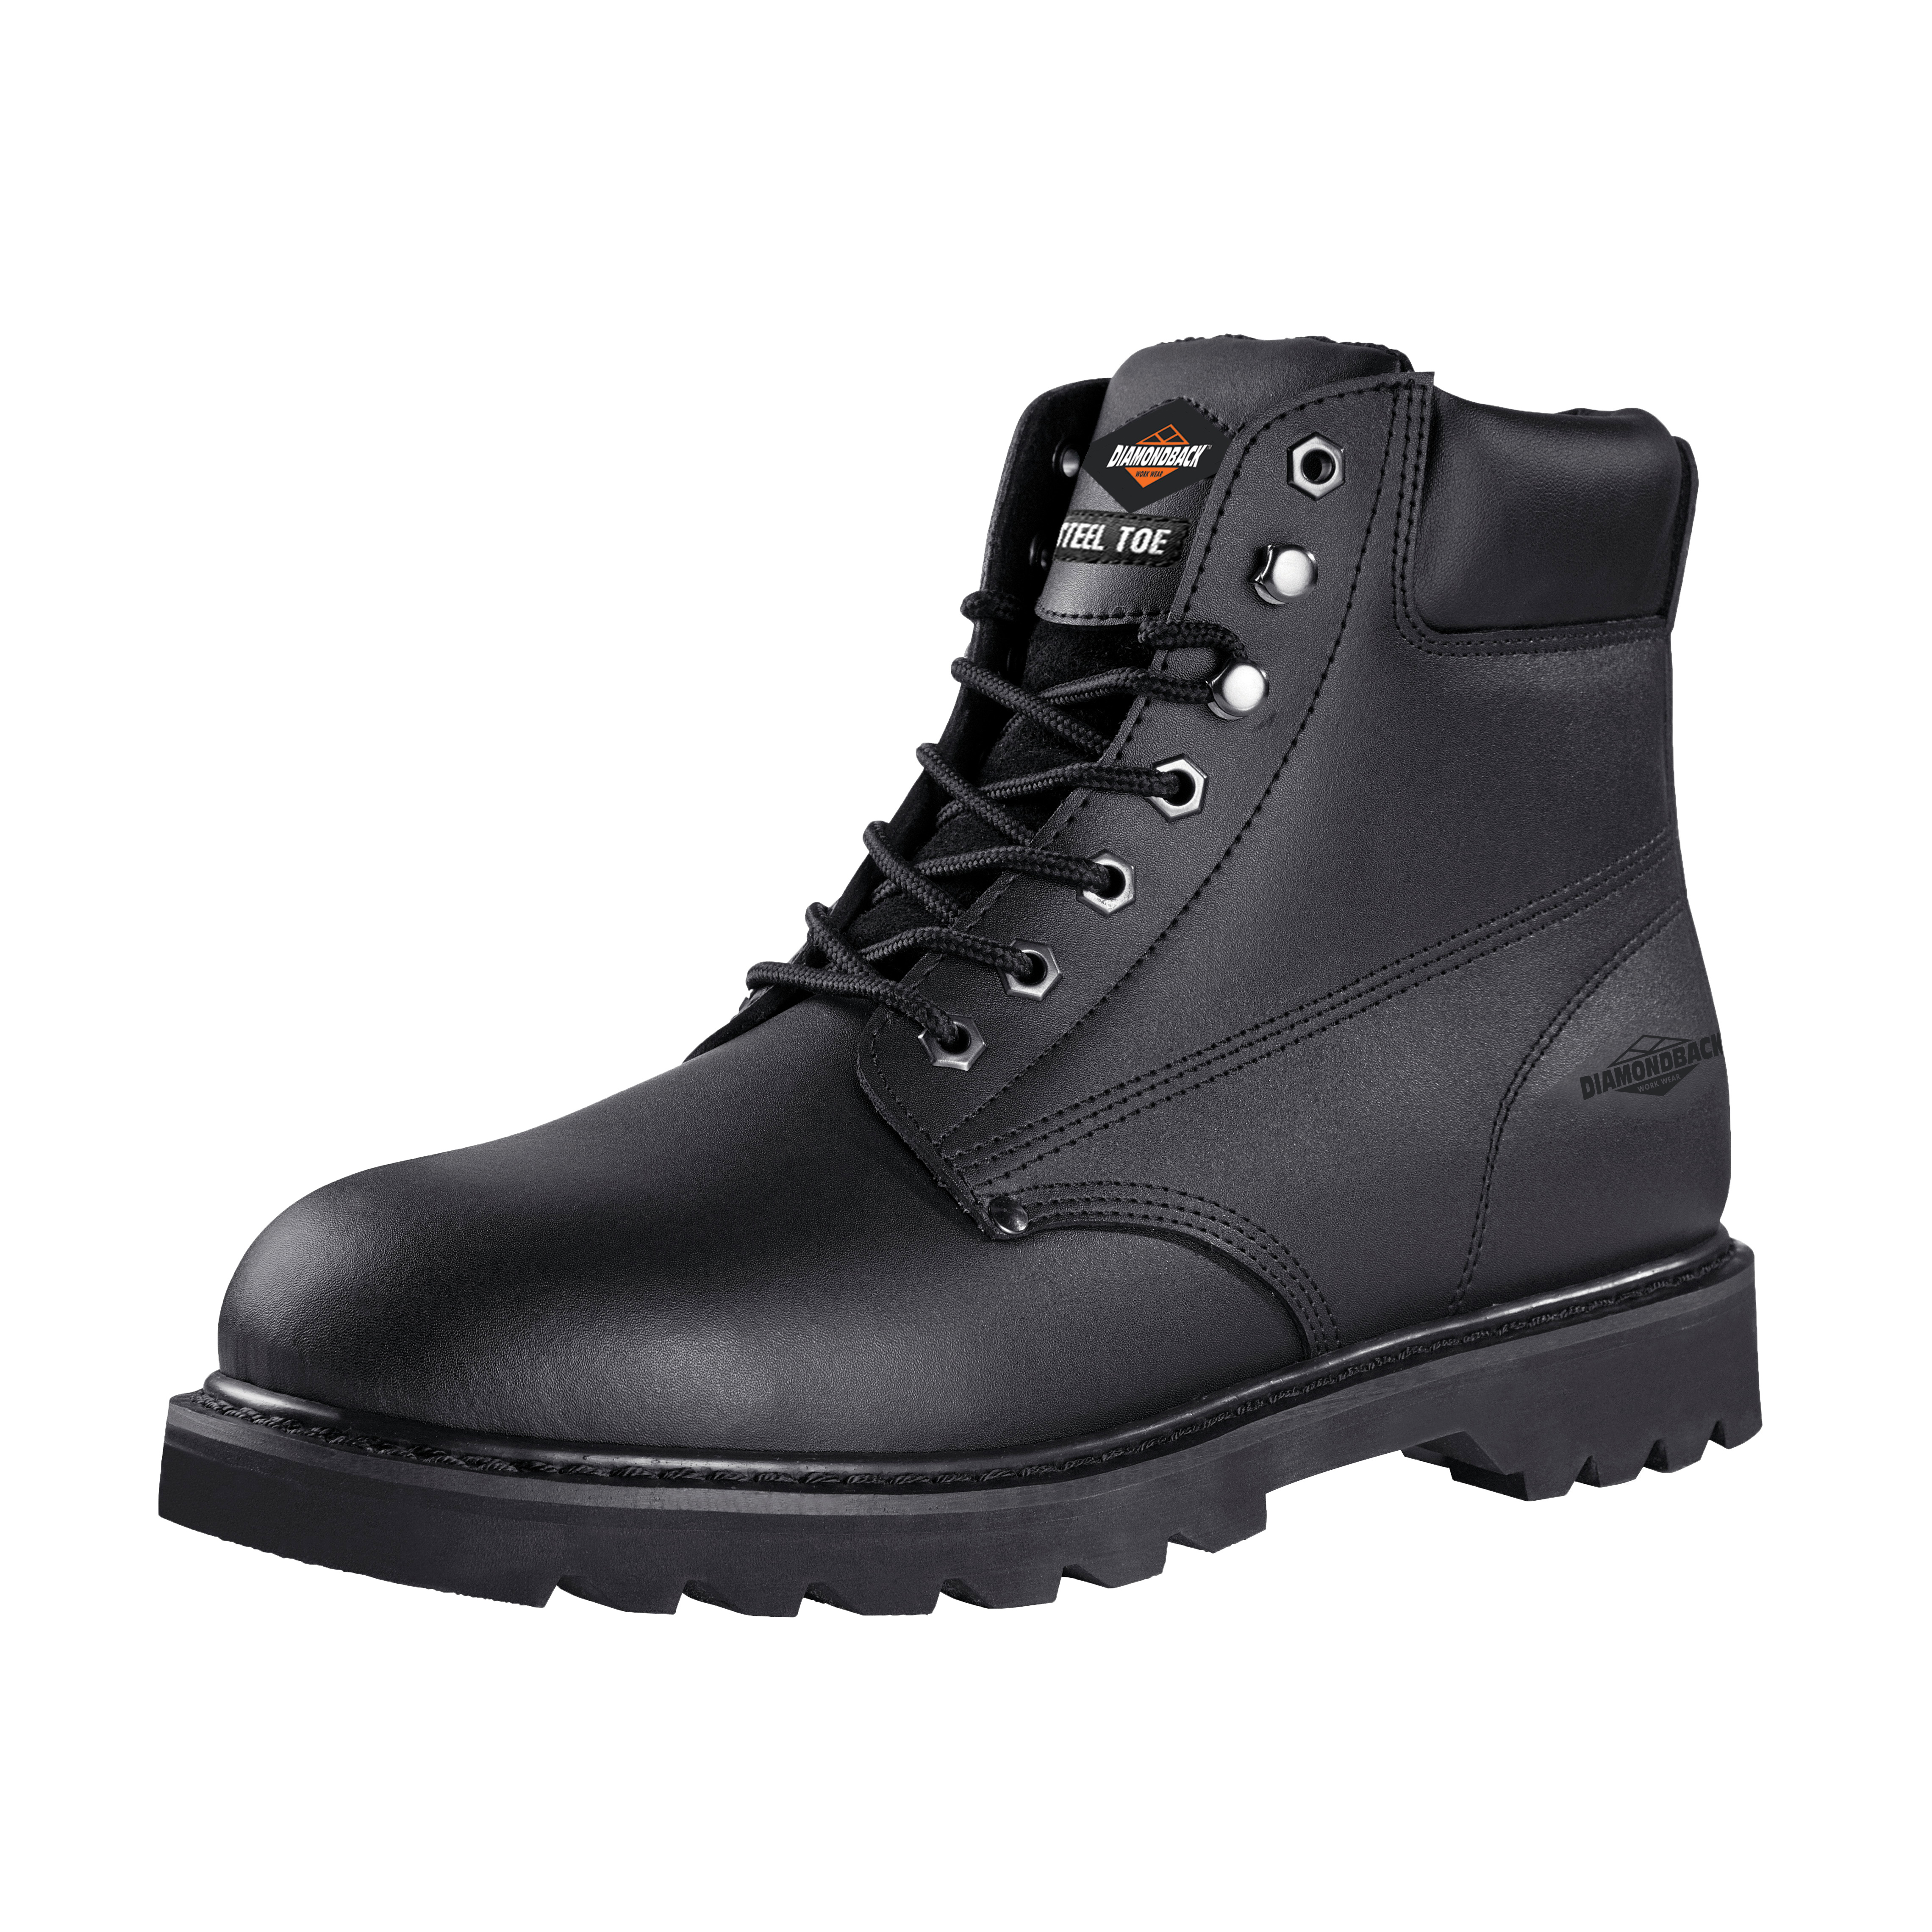 Work Boots, 13, Medium W, Black, Leather Upper, Lace-Up, Steel Toe, With Lining